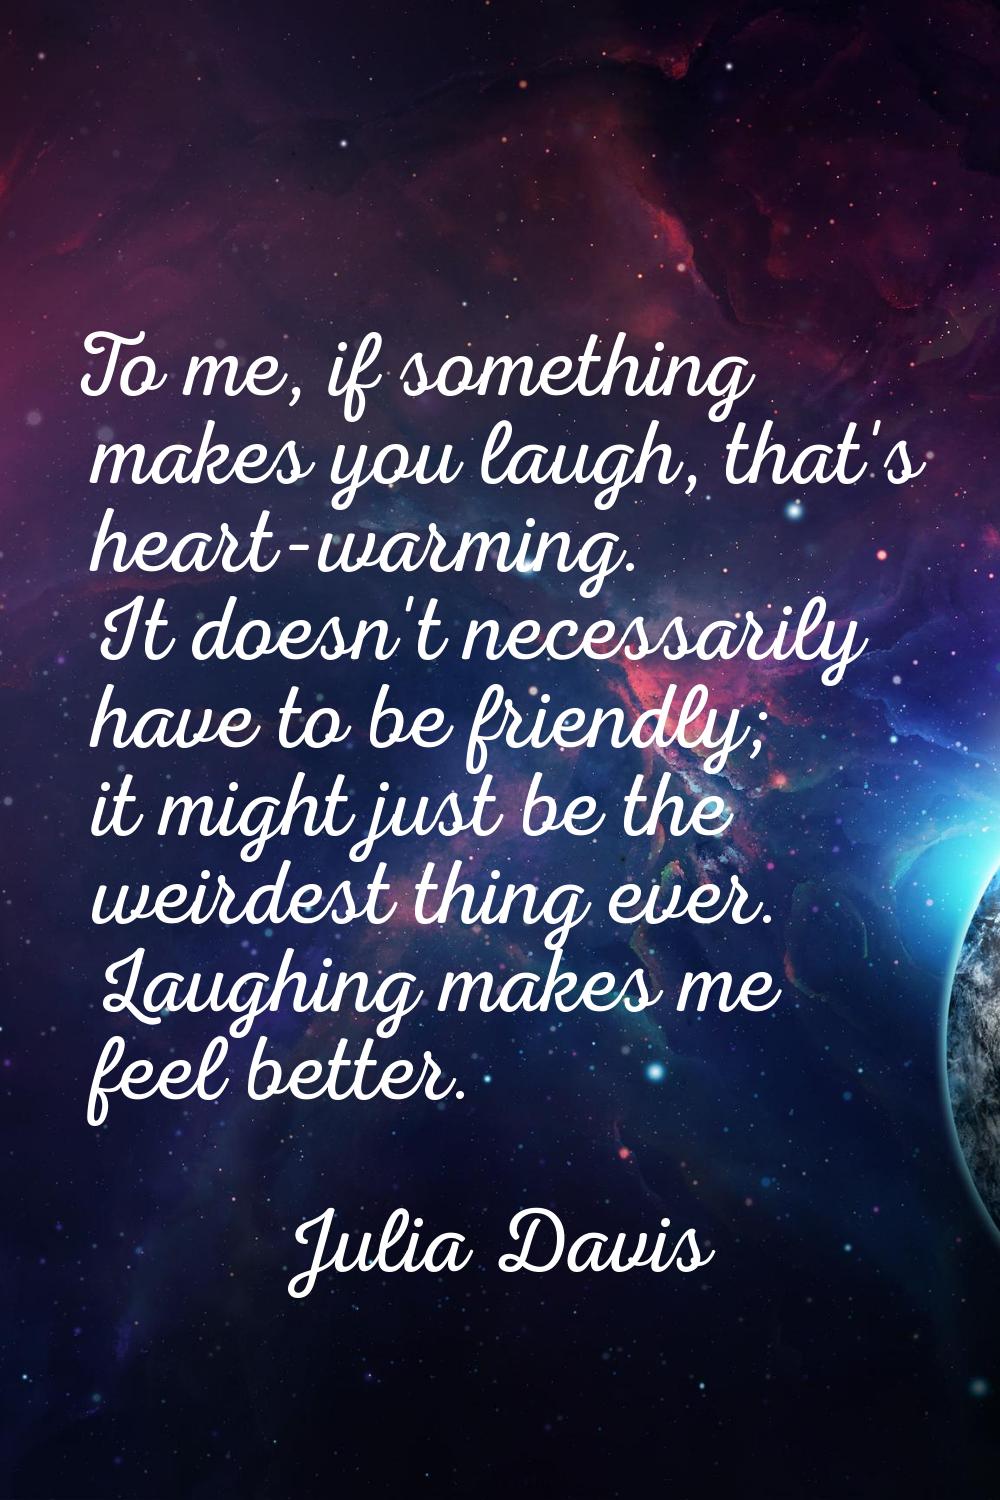 To me, if something makes you laugh, that's heart-warming. It doesn't necessarily have to be friend